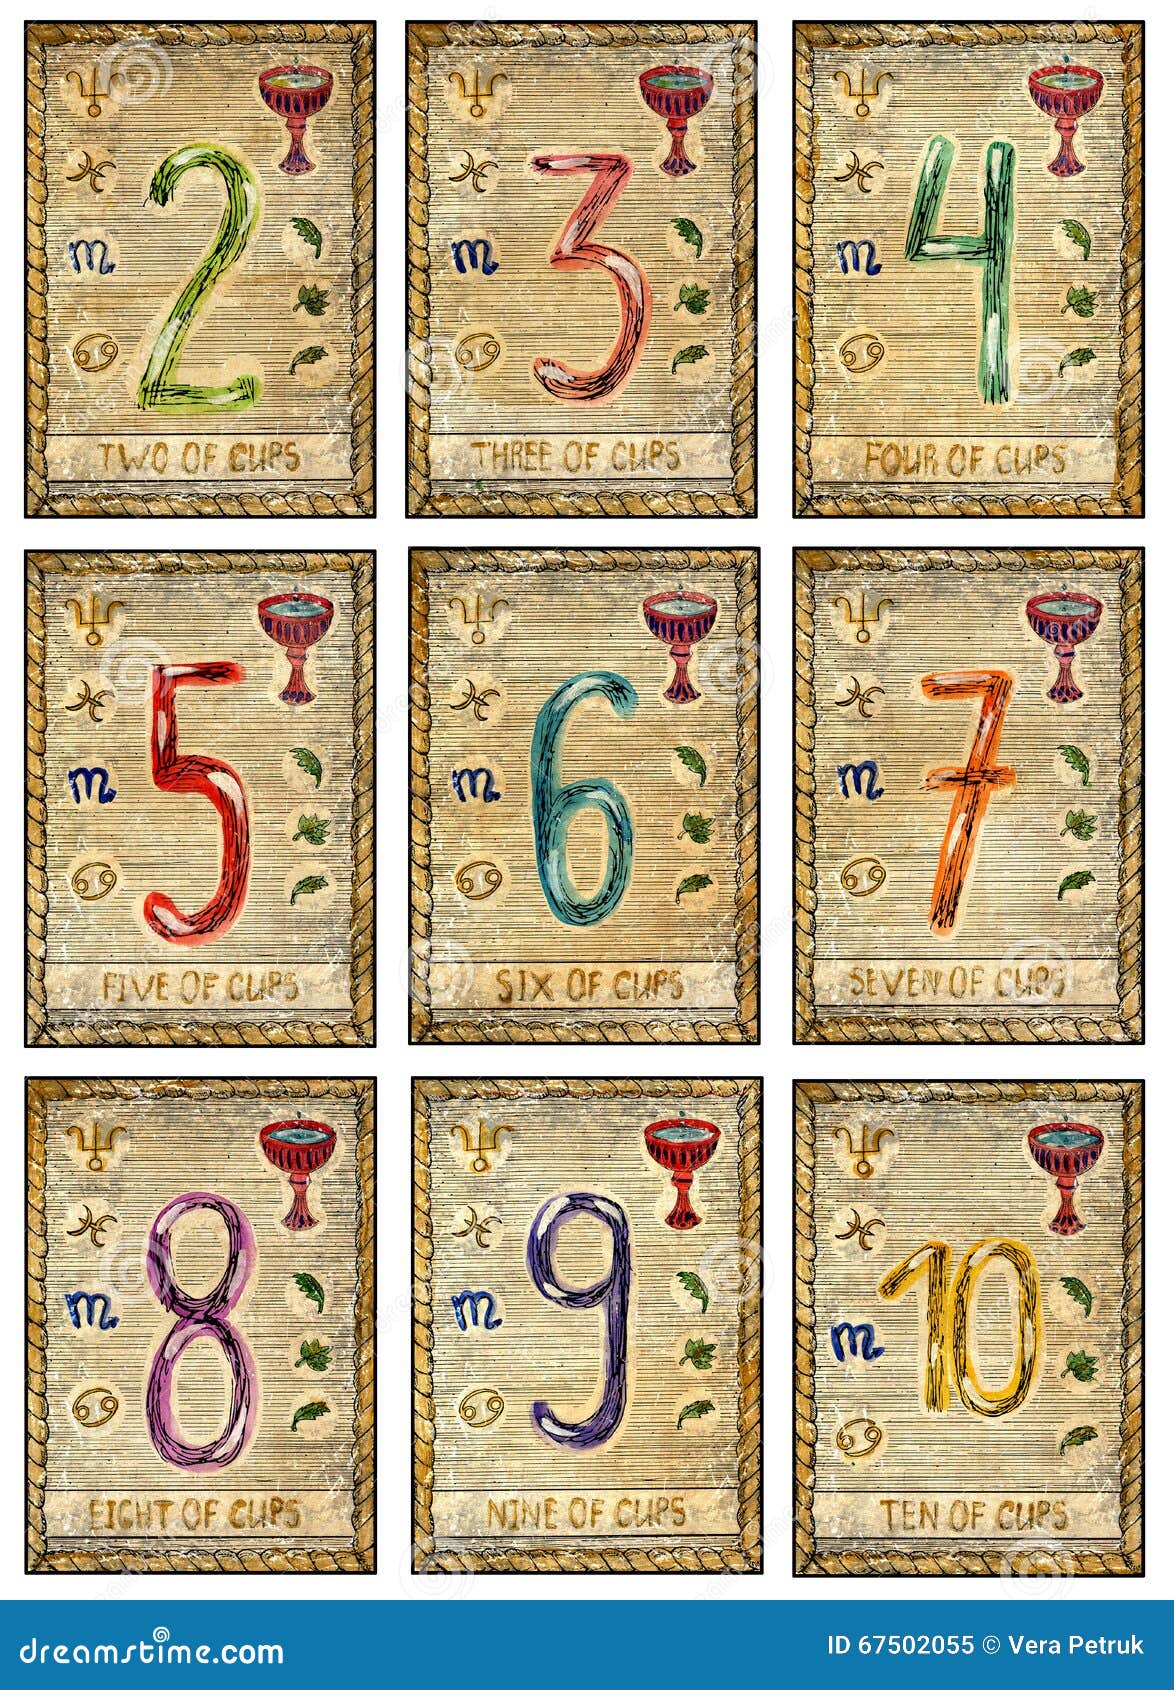 Tarot Numerology: Learning the Meanings of Tarot Card Numbers